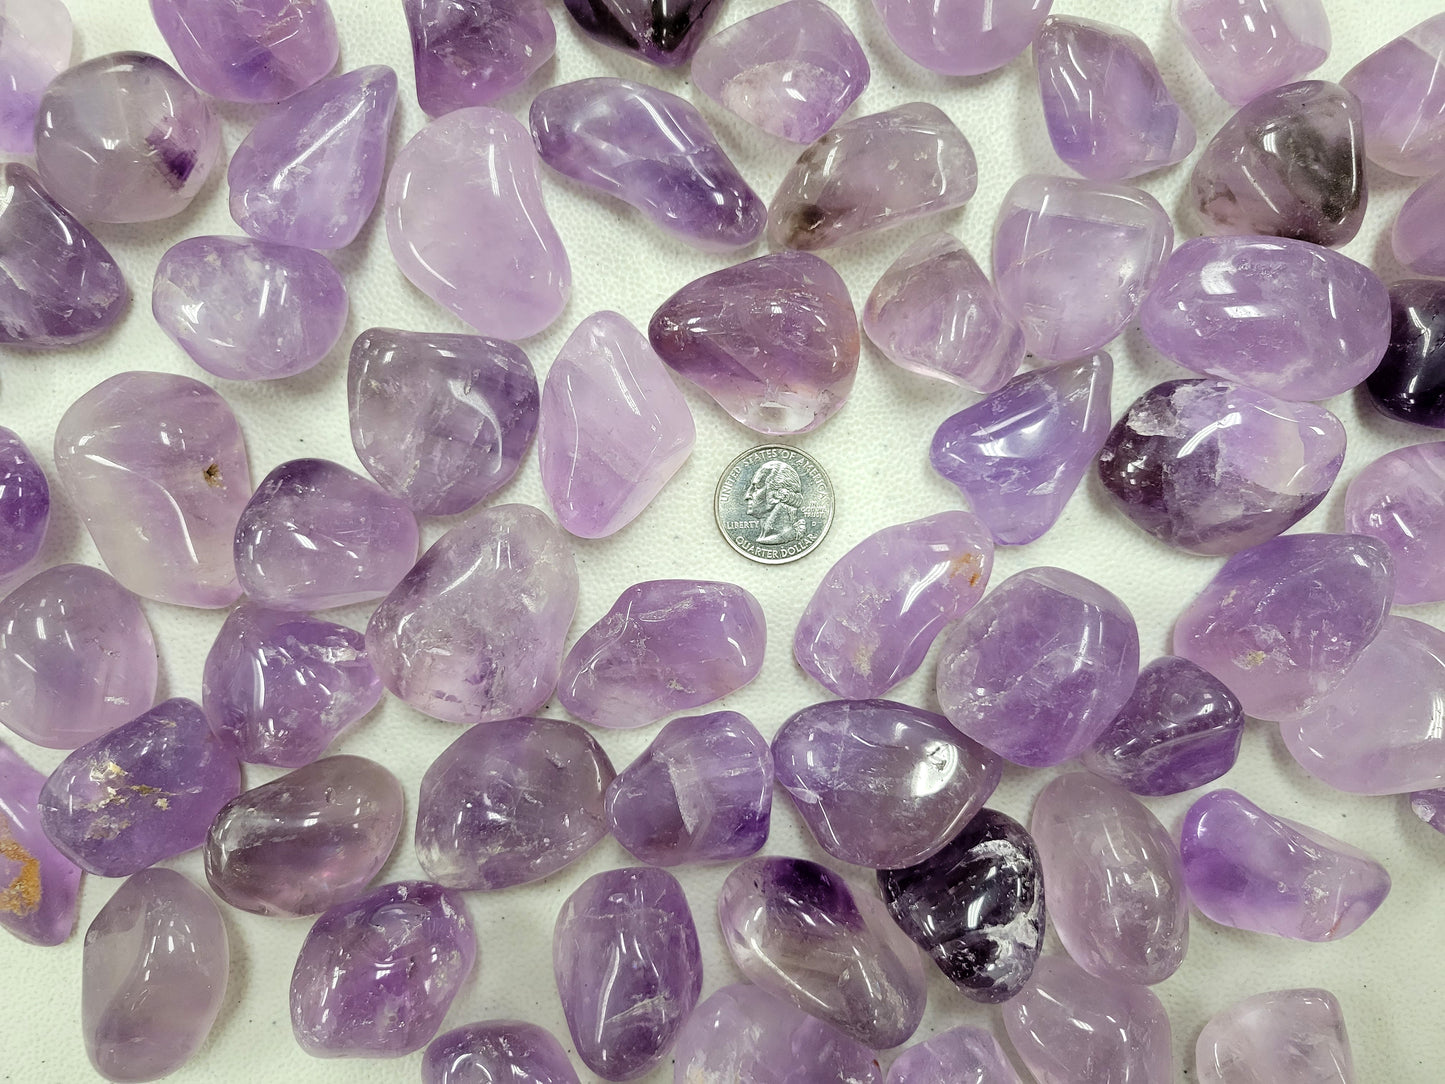 Large Tumbled Amethyst Crystals